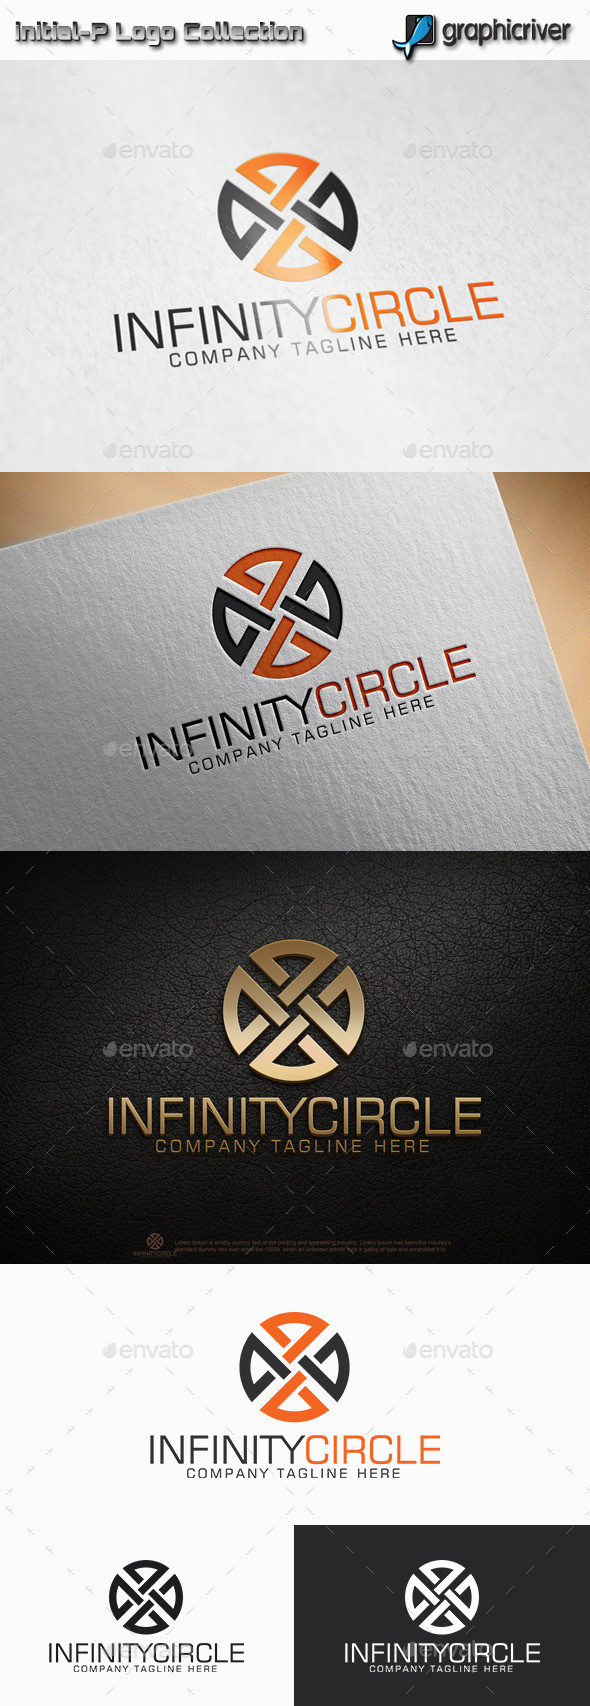 Infinity 20circle 20preview